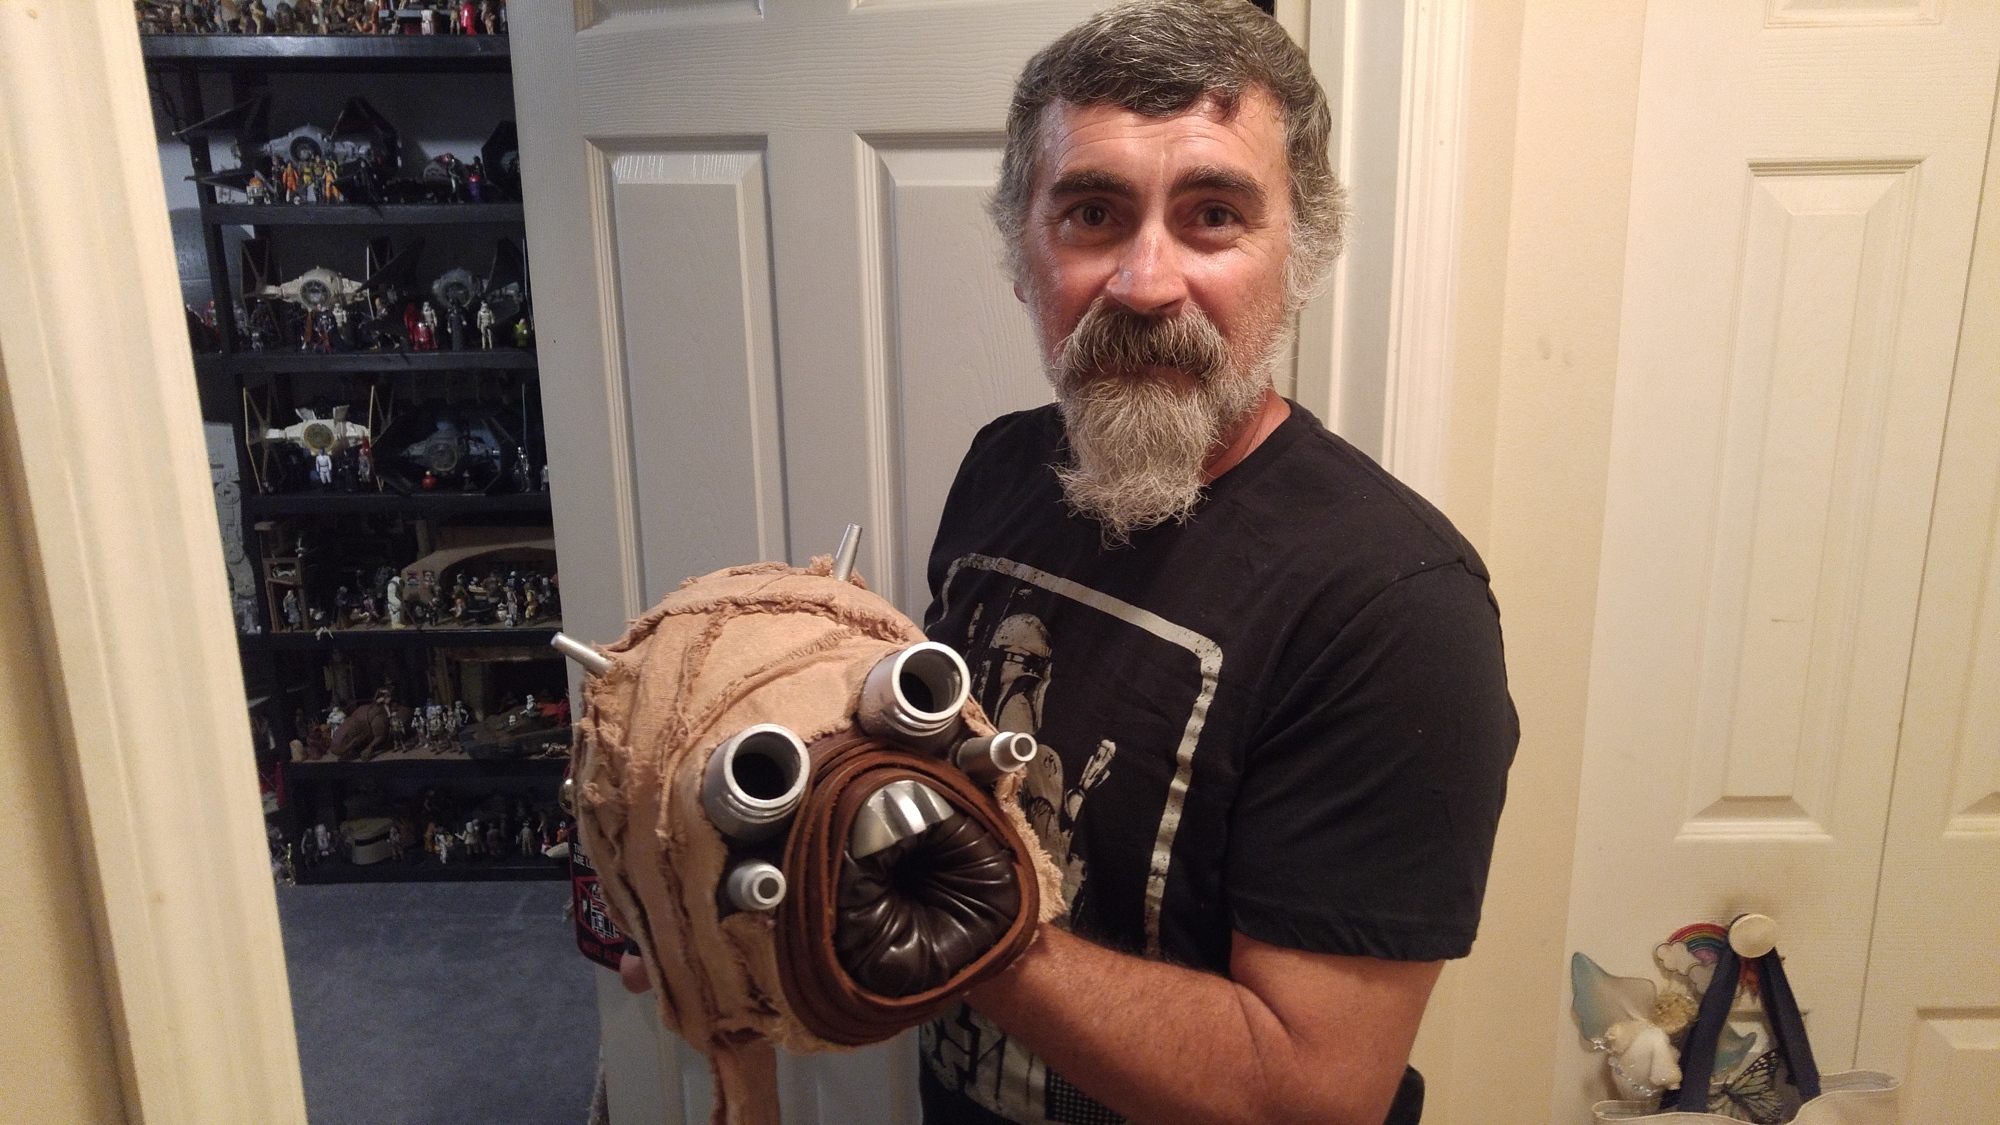 Keith DeDeo holds up the head of his Tuscan Raider costume. Photo by Brent Woronoff